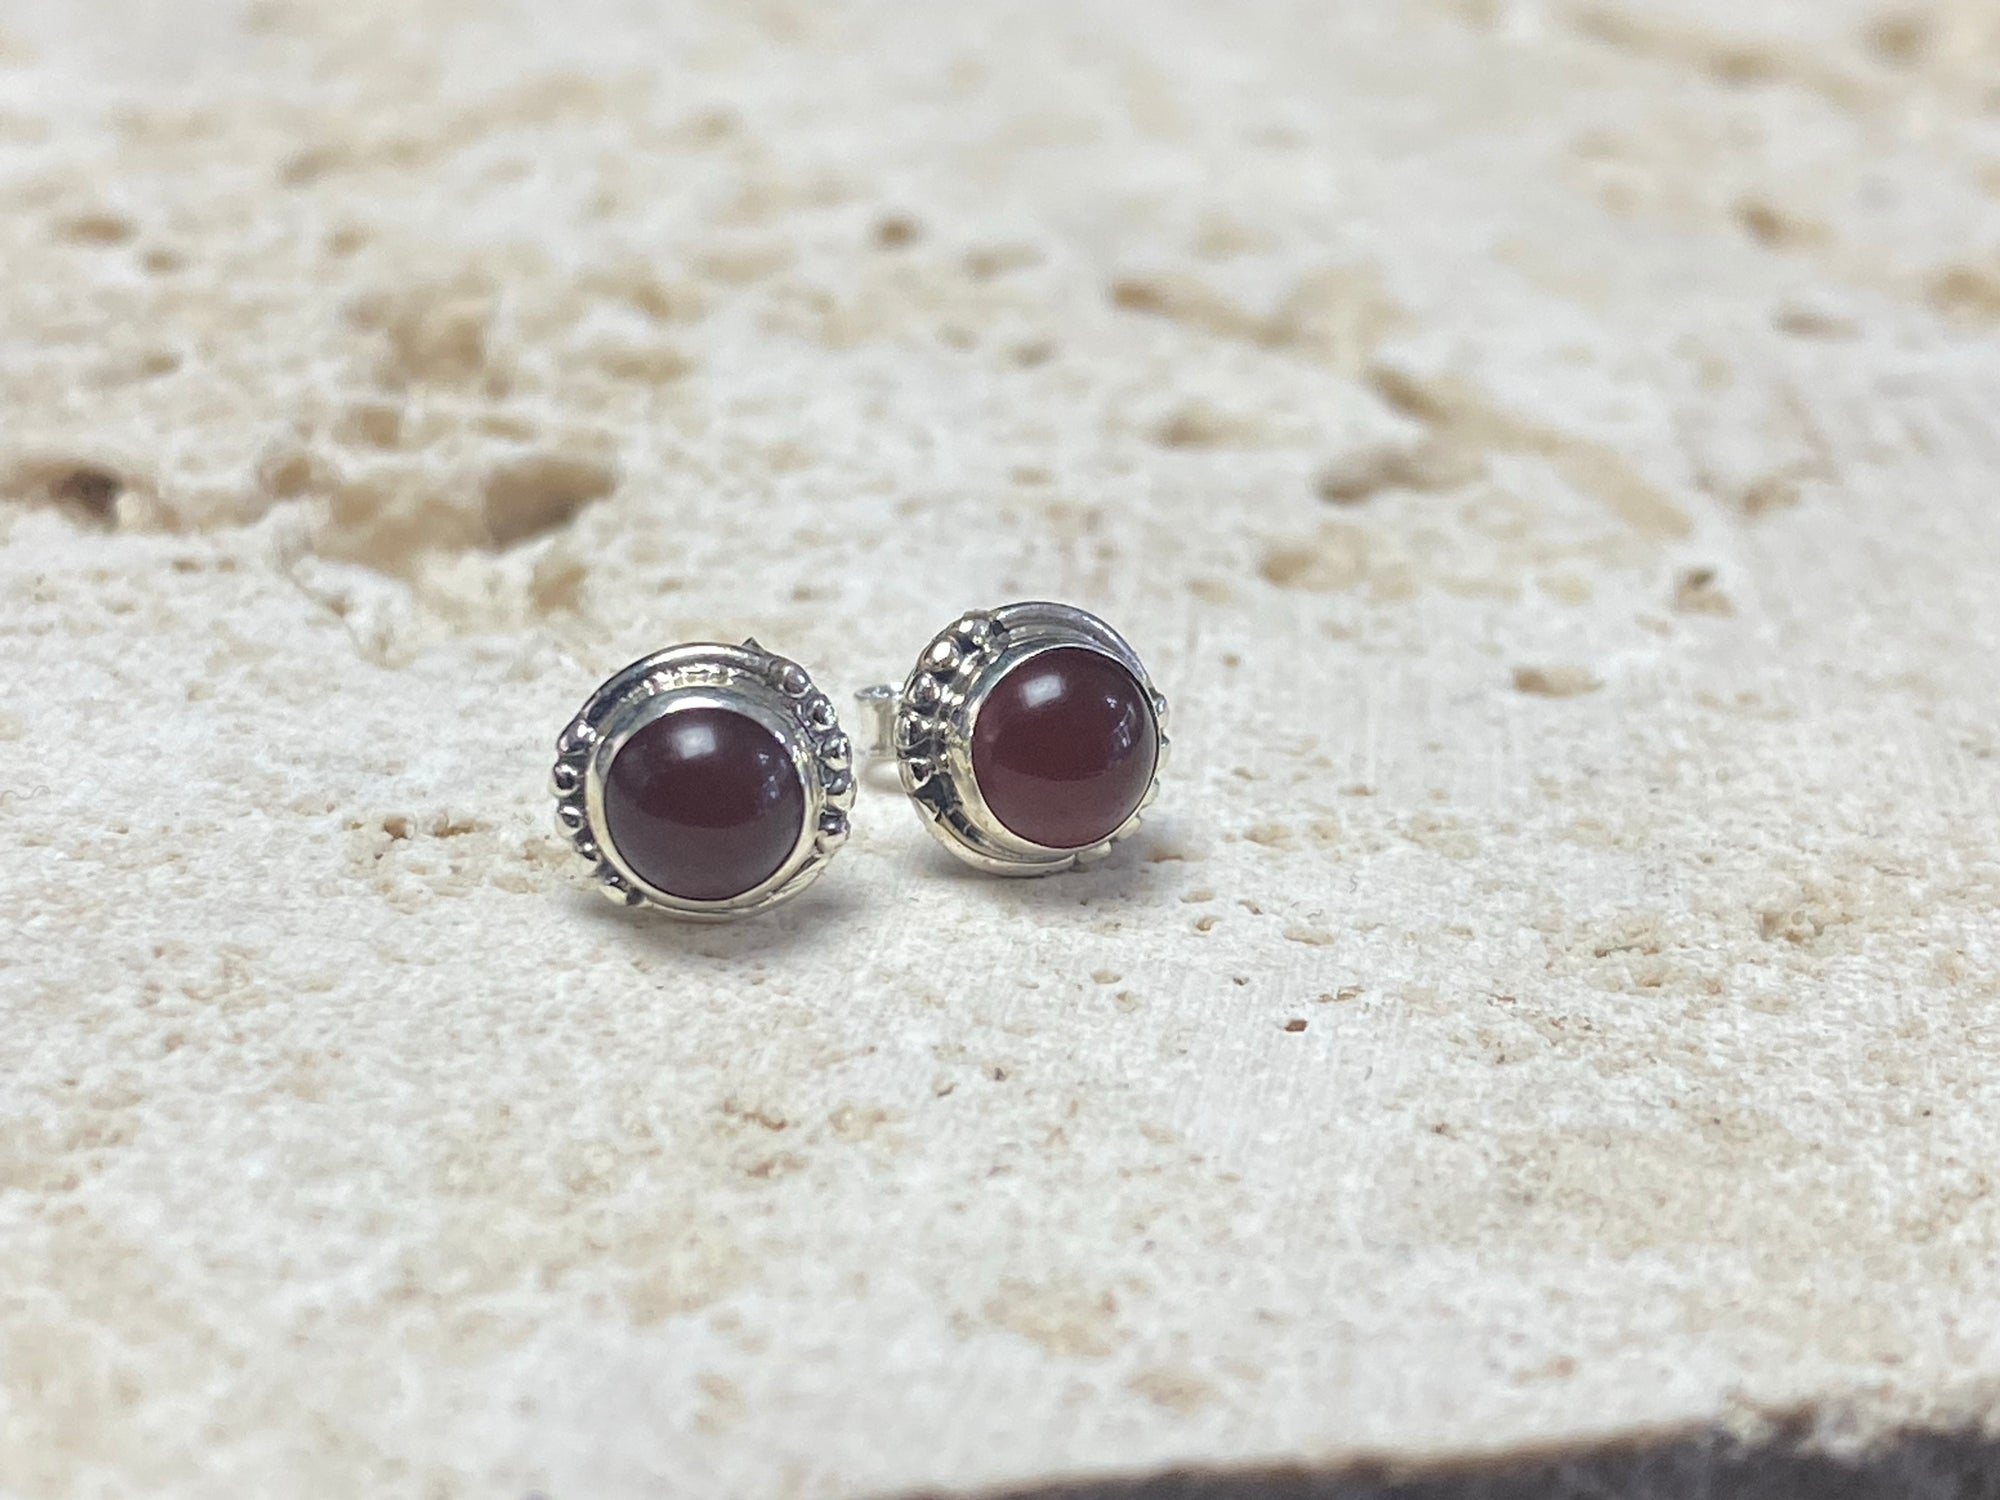 Simple and elegant, these small carnelian earring studs are hand made from sterling silver and set with natural carnelian cabochon stones